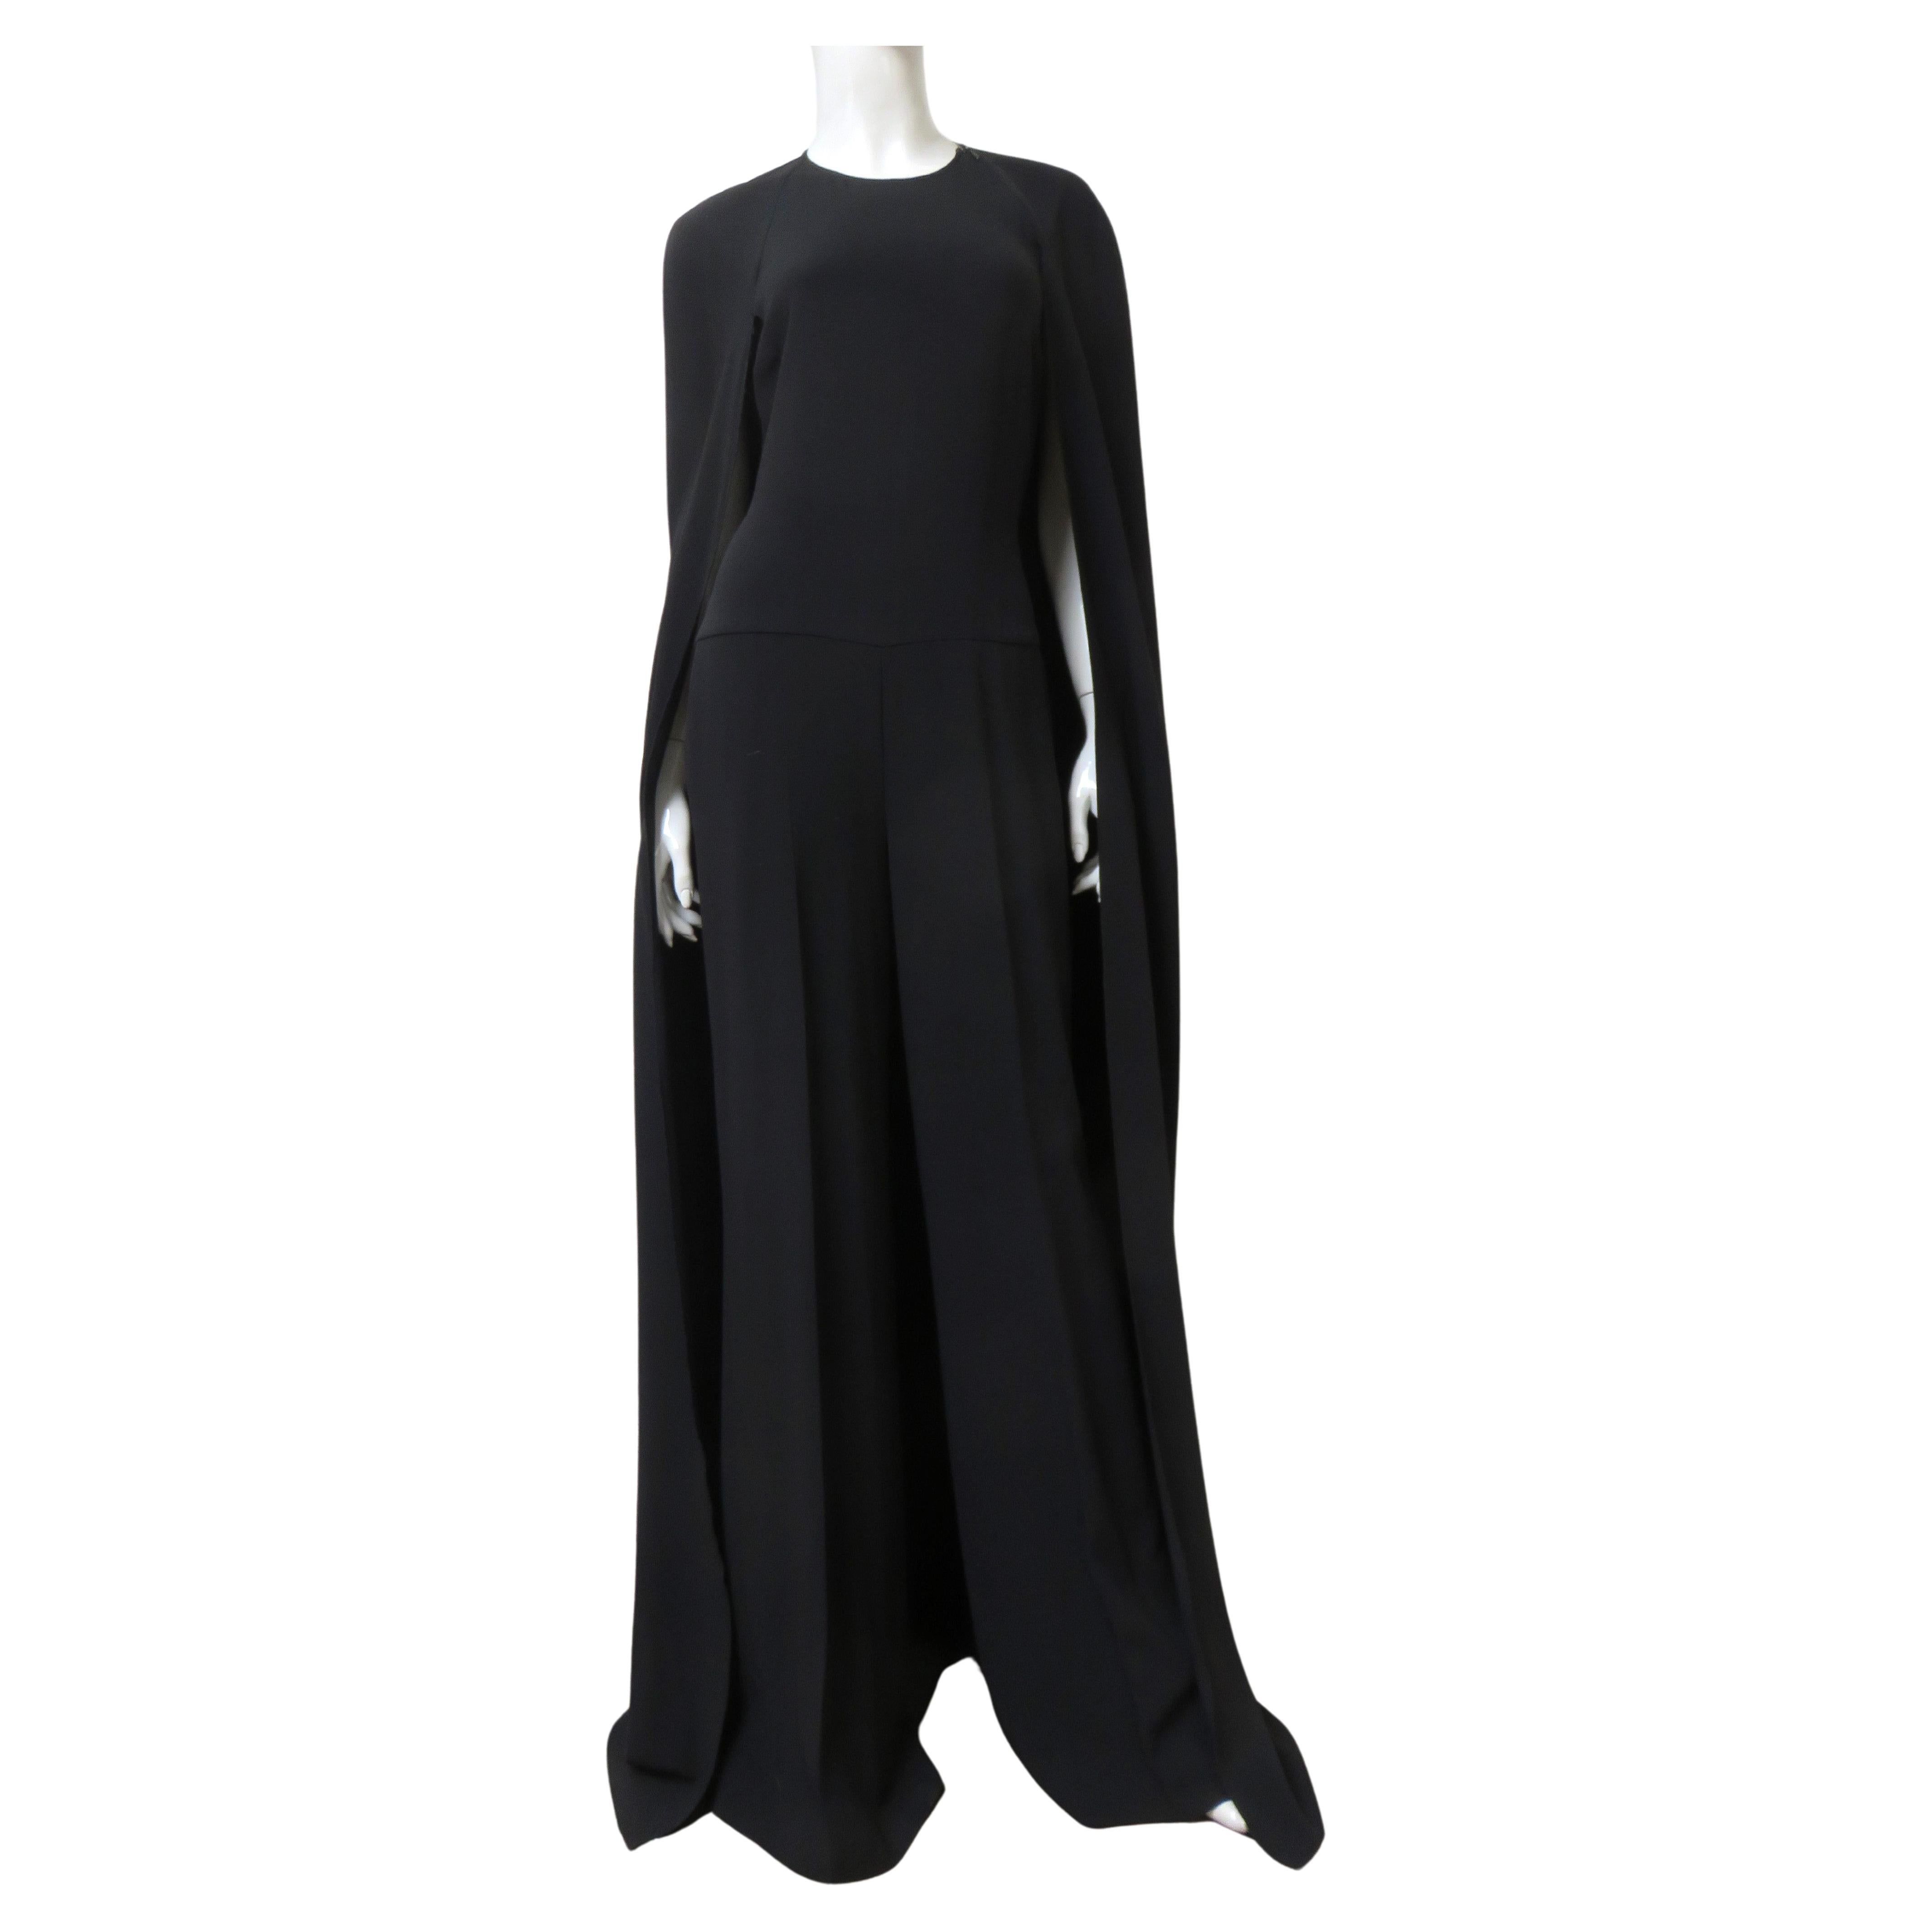 Stella McCartney New S/S 2015 Jumpsuit with Cape For Sale